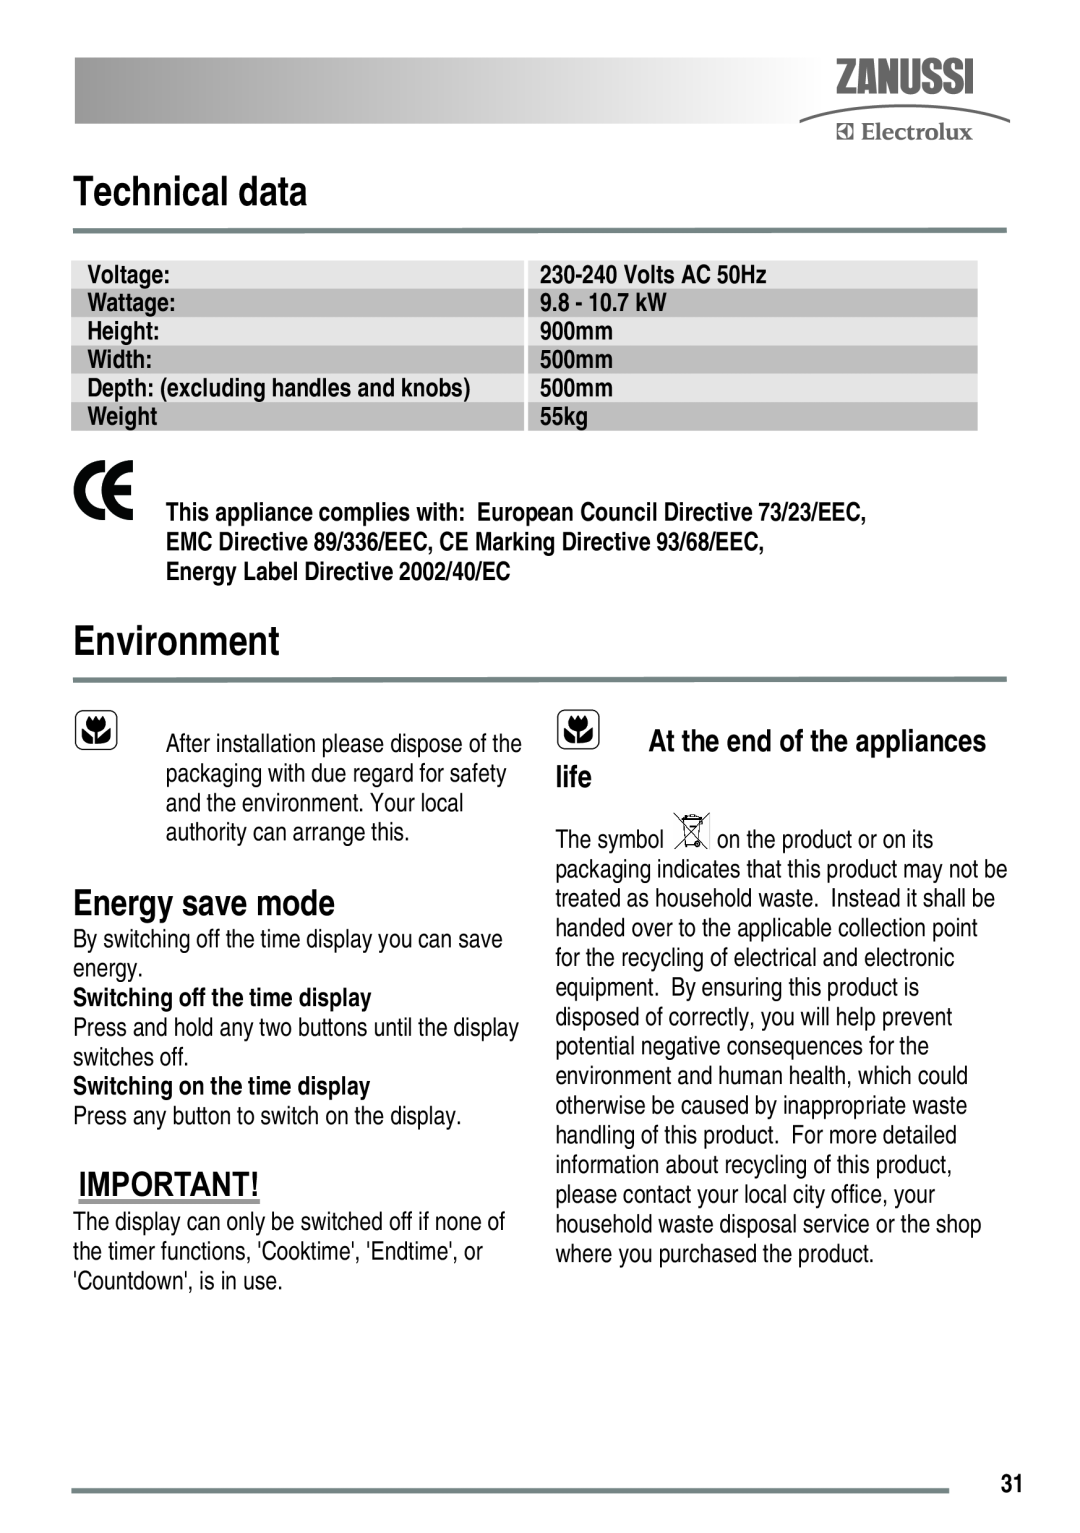 Zanussi ZKC5030 Technical data, Environment, Energy save mode, At the end of the appliances life, Voltage, Volts AC 50Hz 